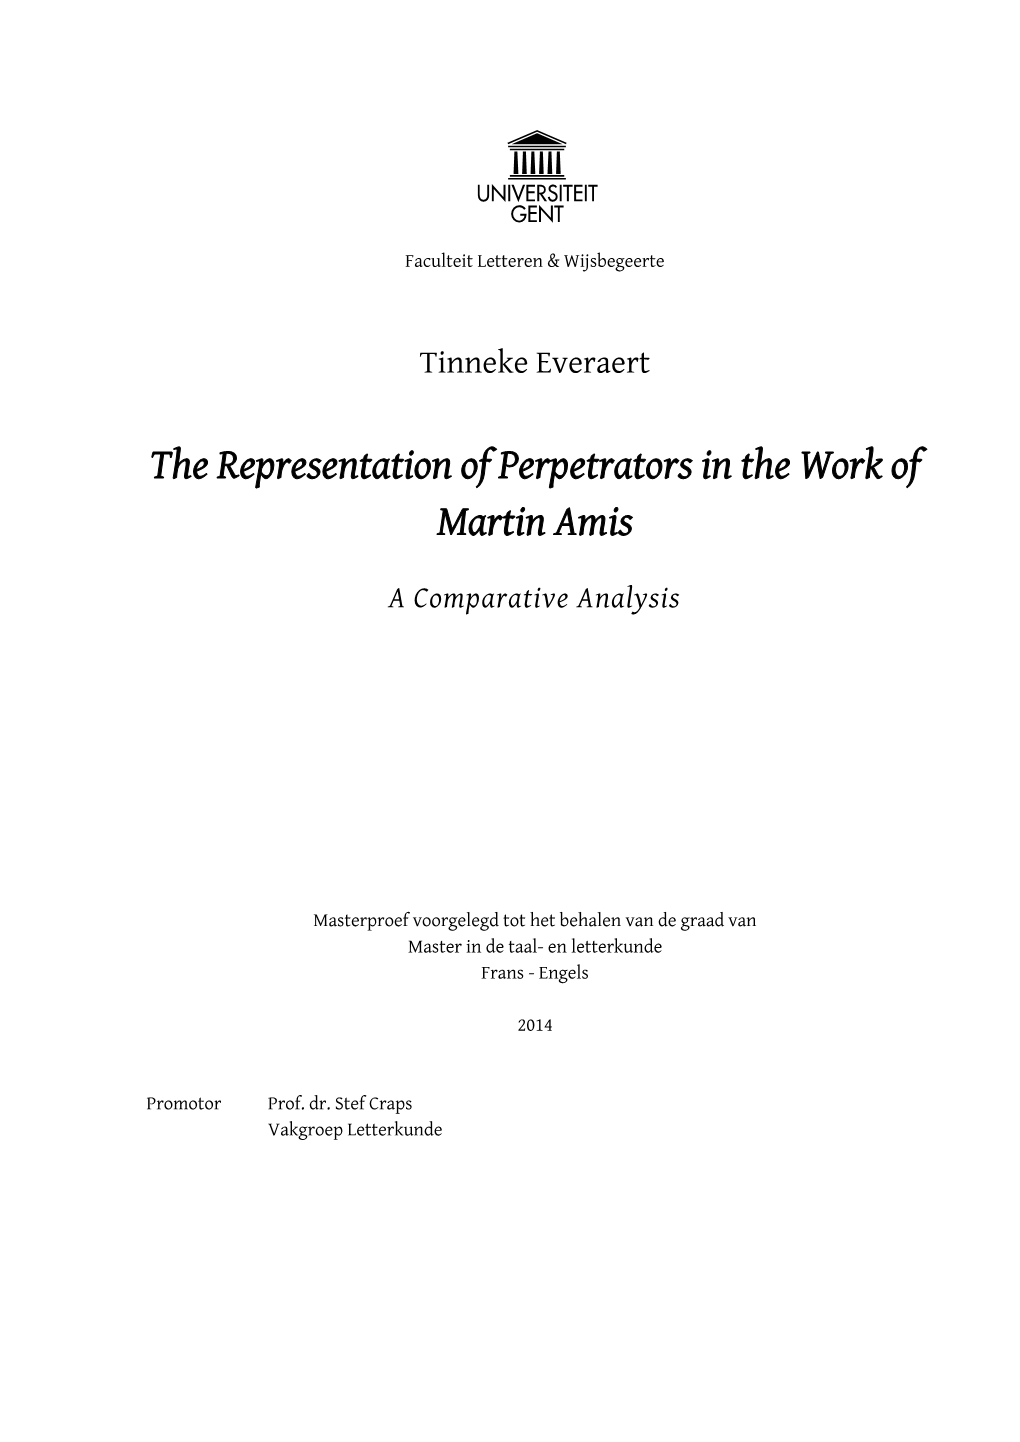 The Representation of Perpetrators in the Work of Martin Amis